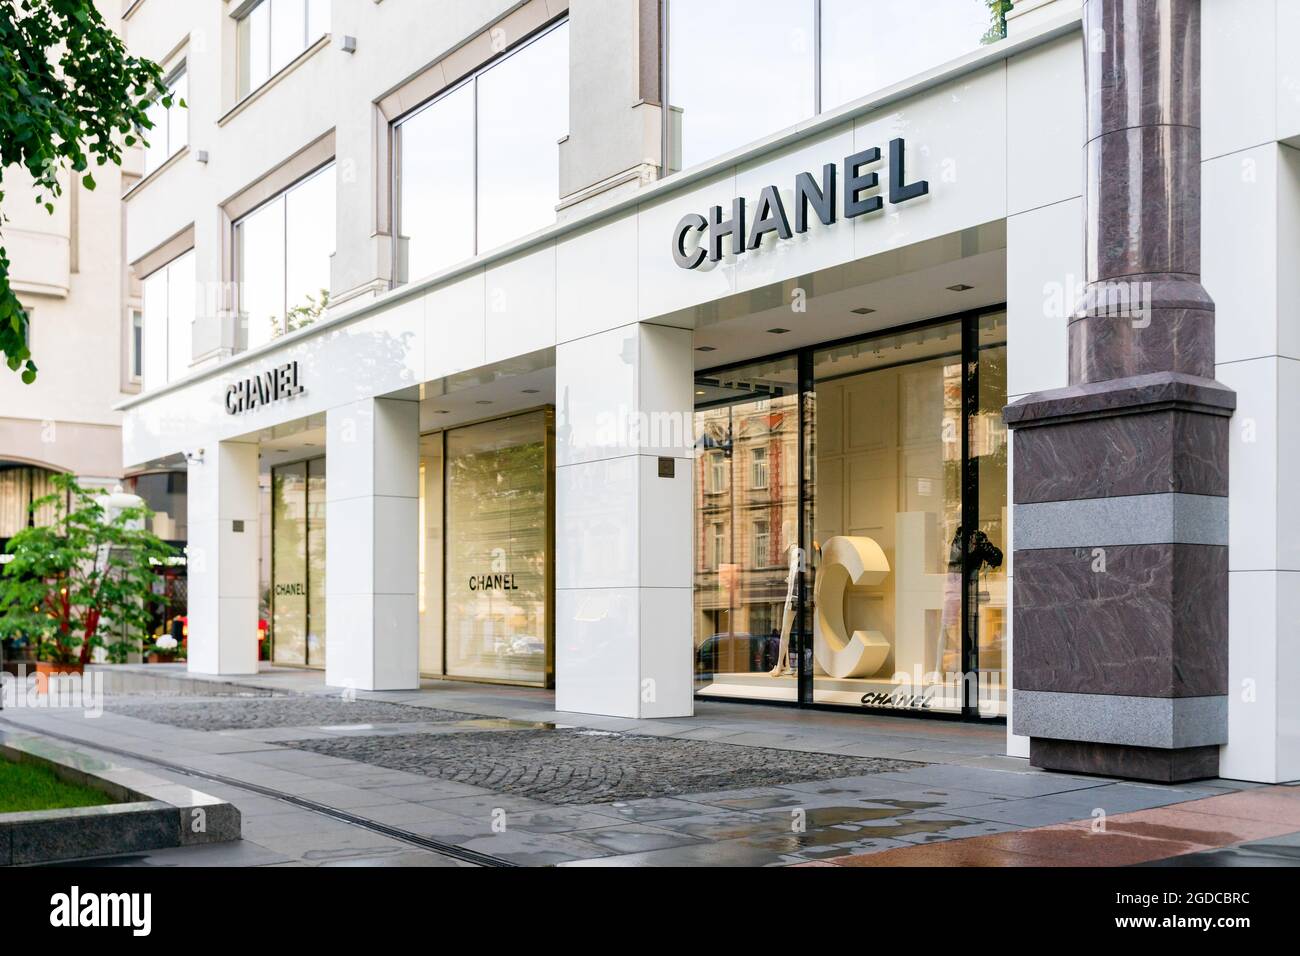 Coco's world: Dazzling new Chanel boutique showcases style of